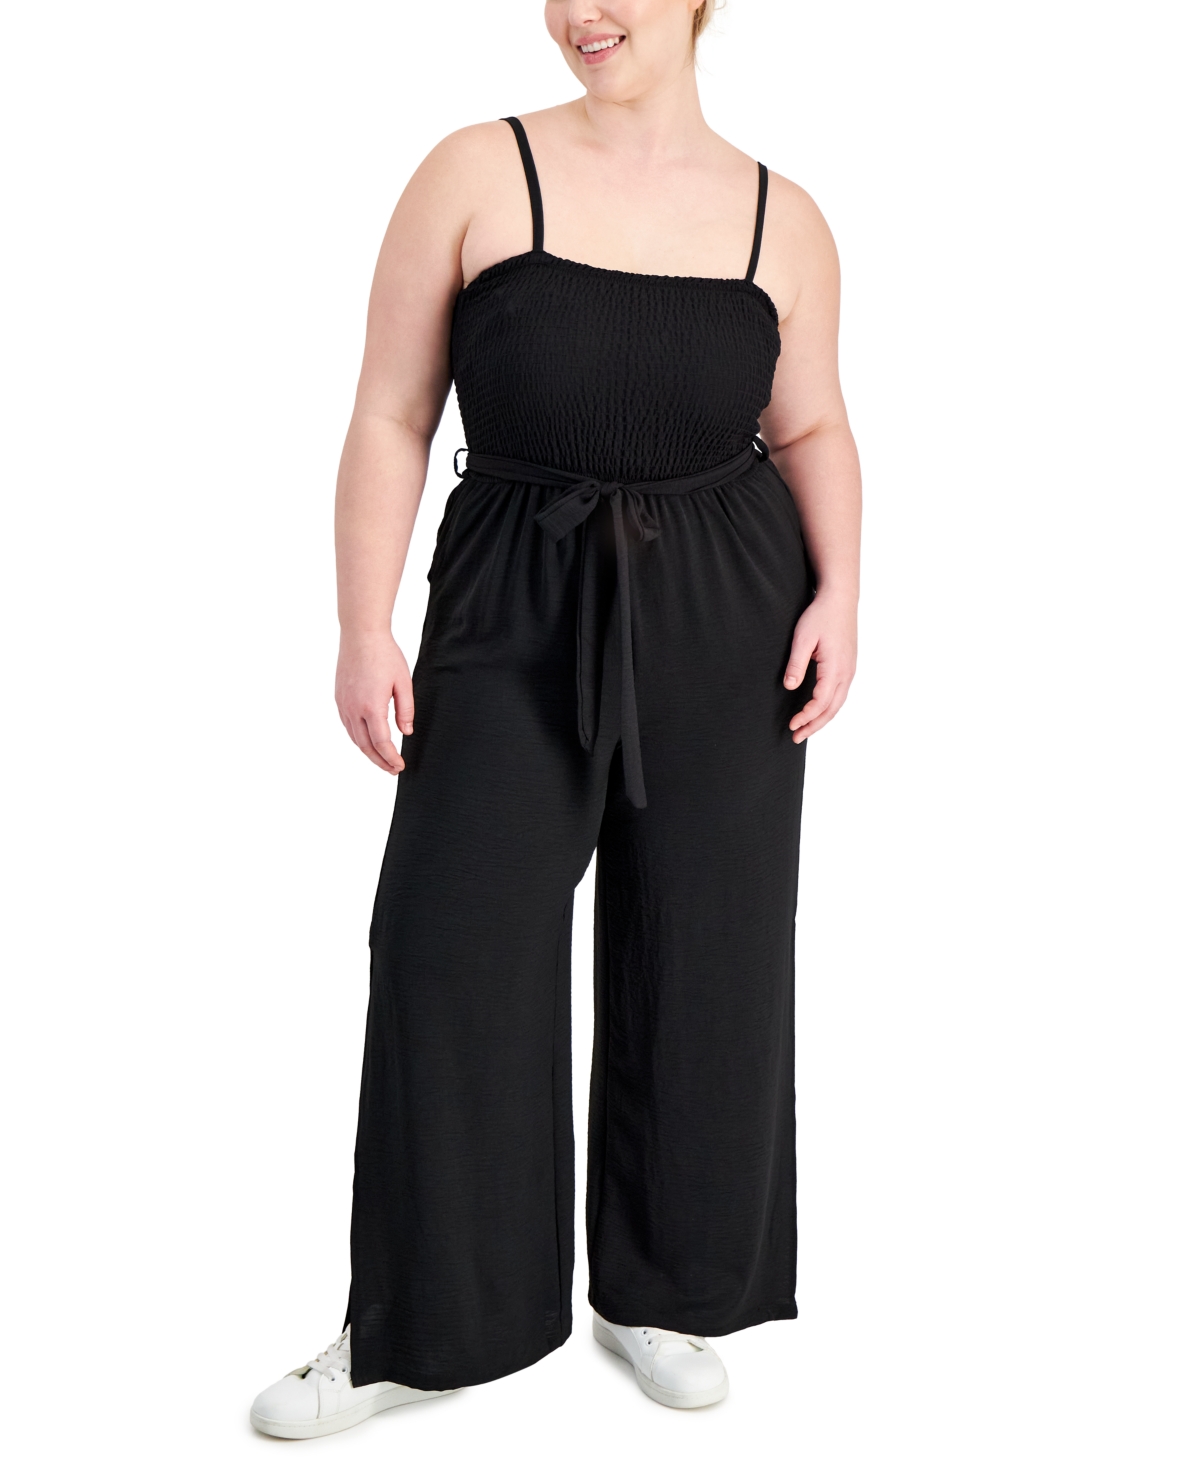 Trendy Plus Size Smocked Spaghetti-Strap Jumpsuit - Beetroot Pink